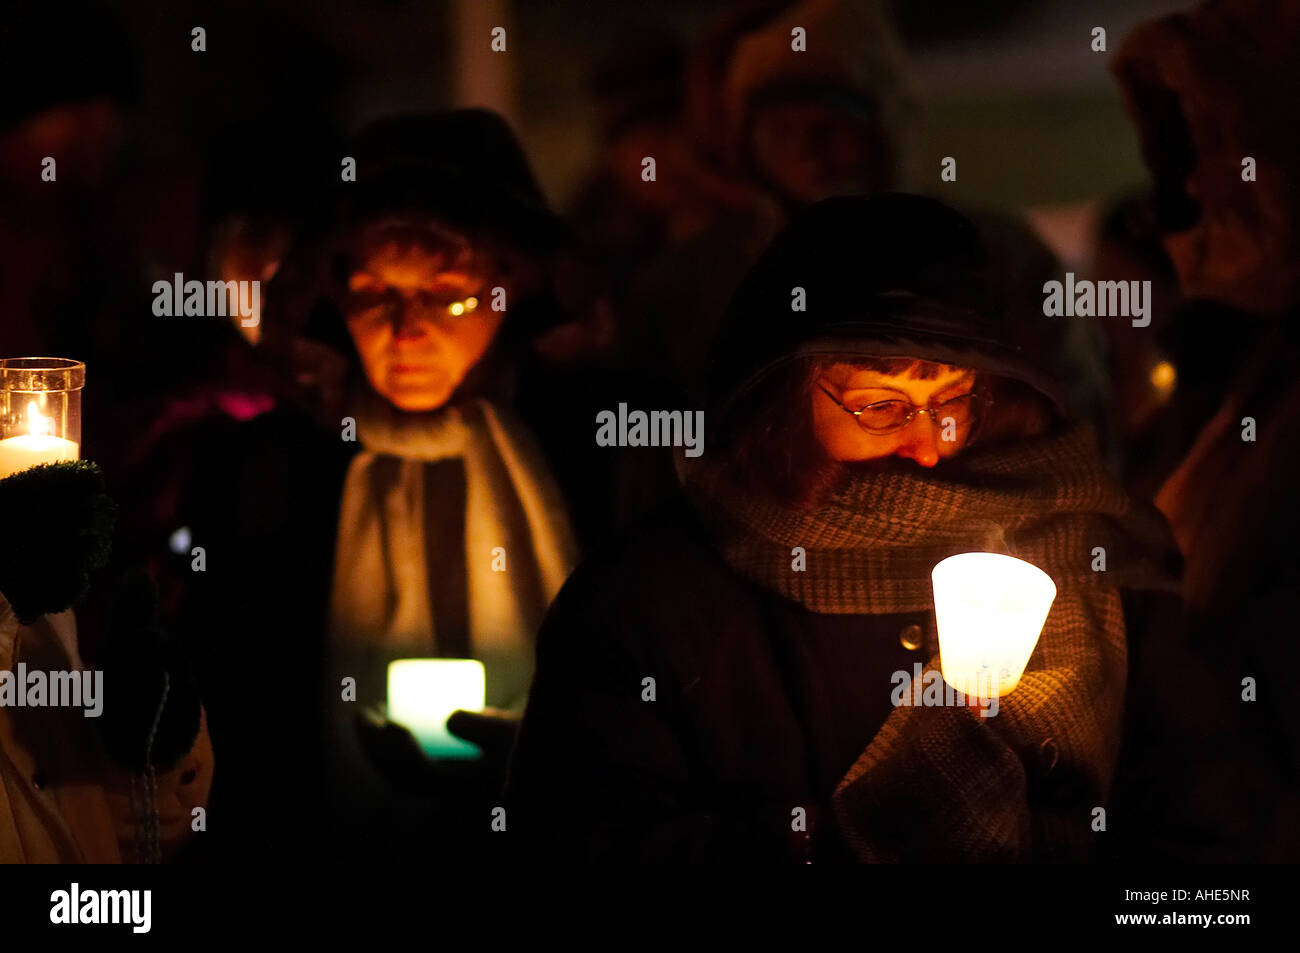 Women holding candles and praying for an end to abortion during a candlelight vigil Stock Photo